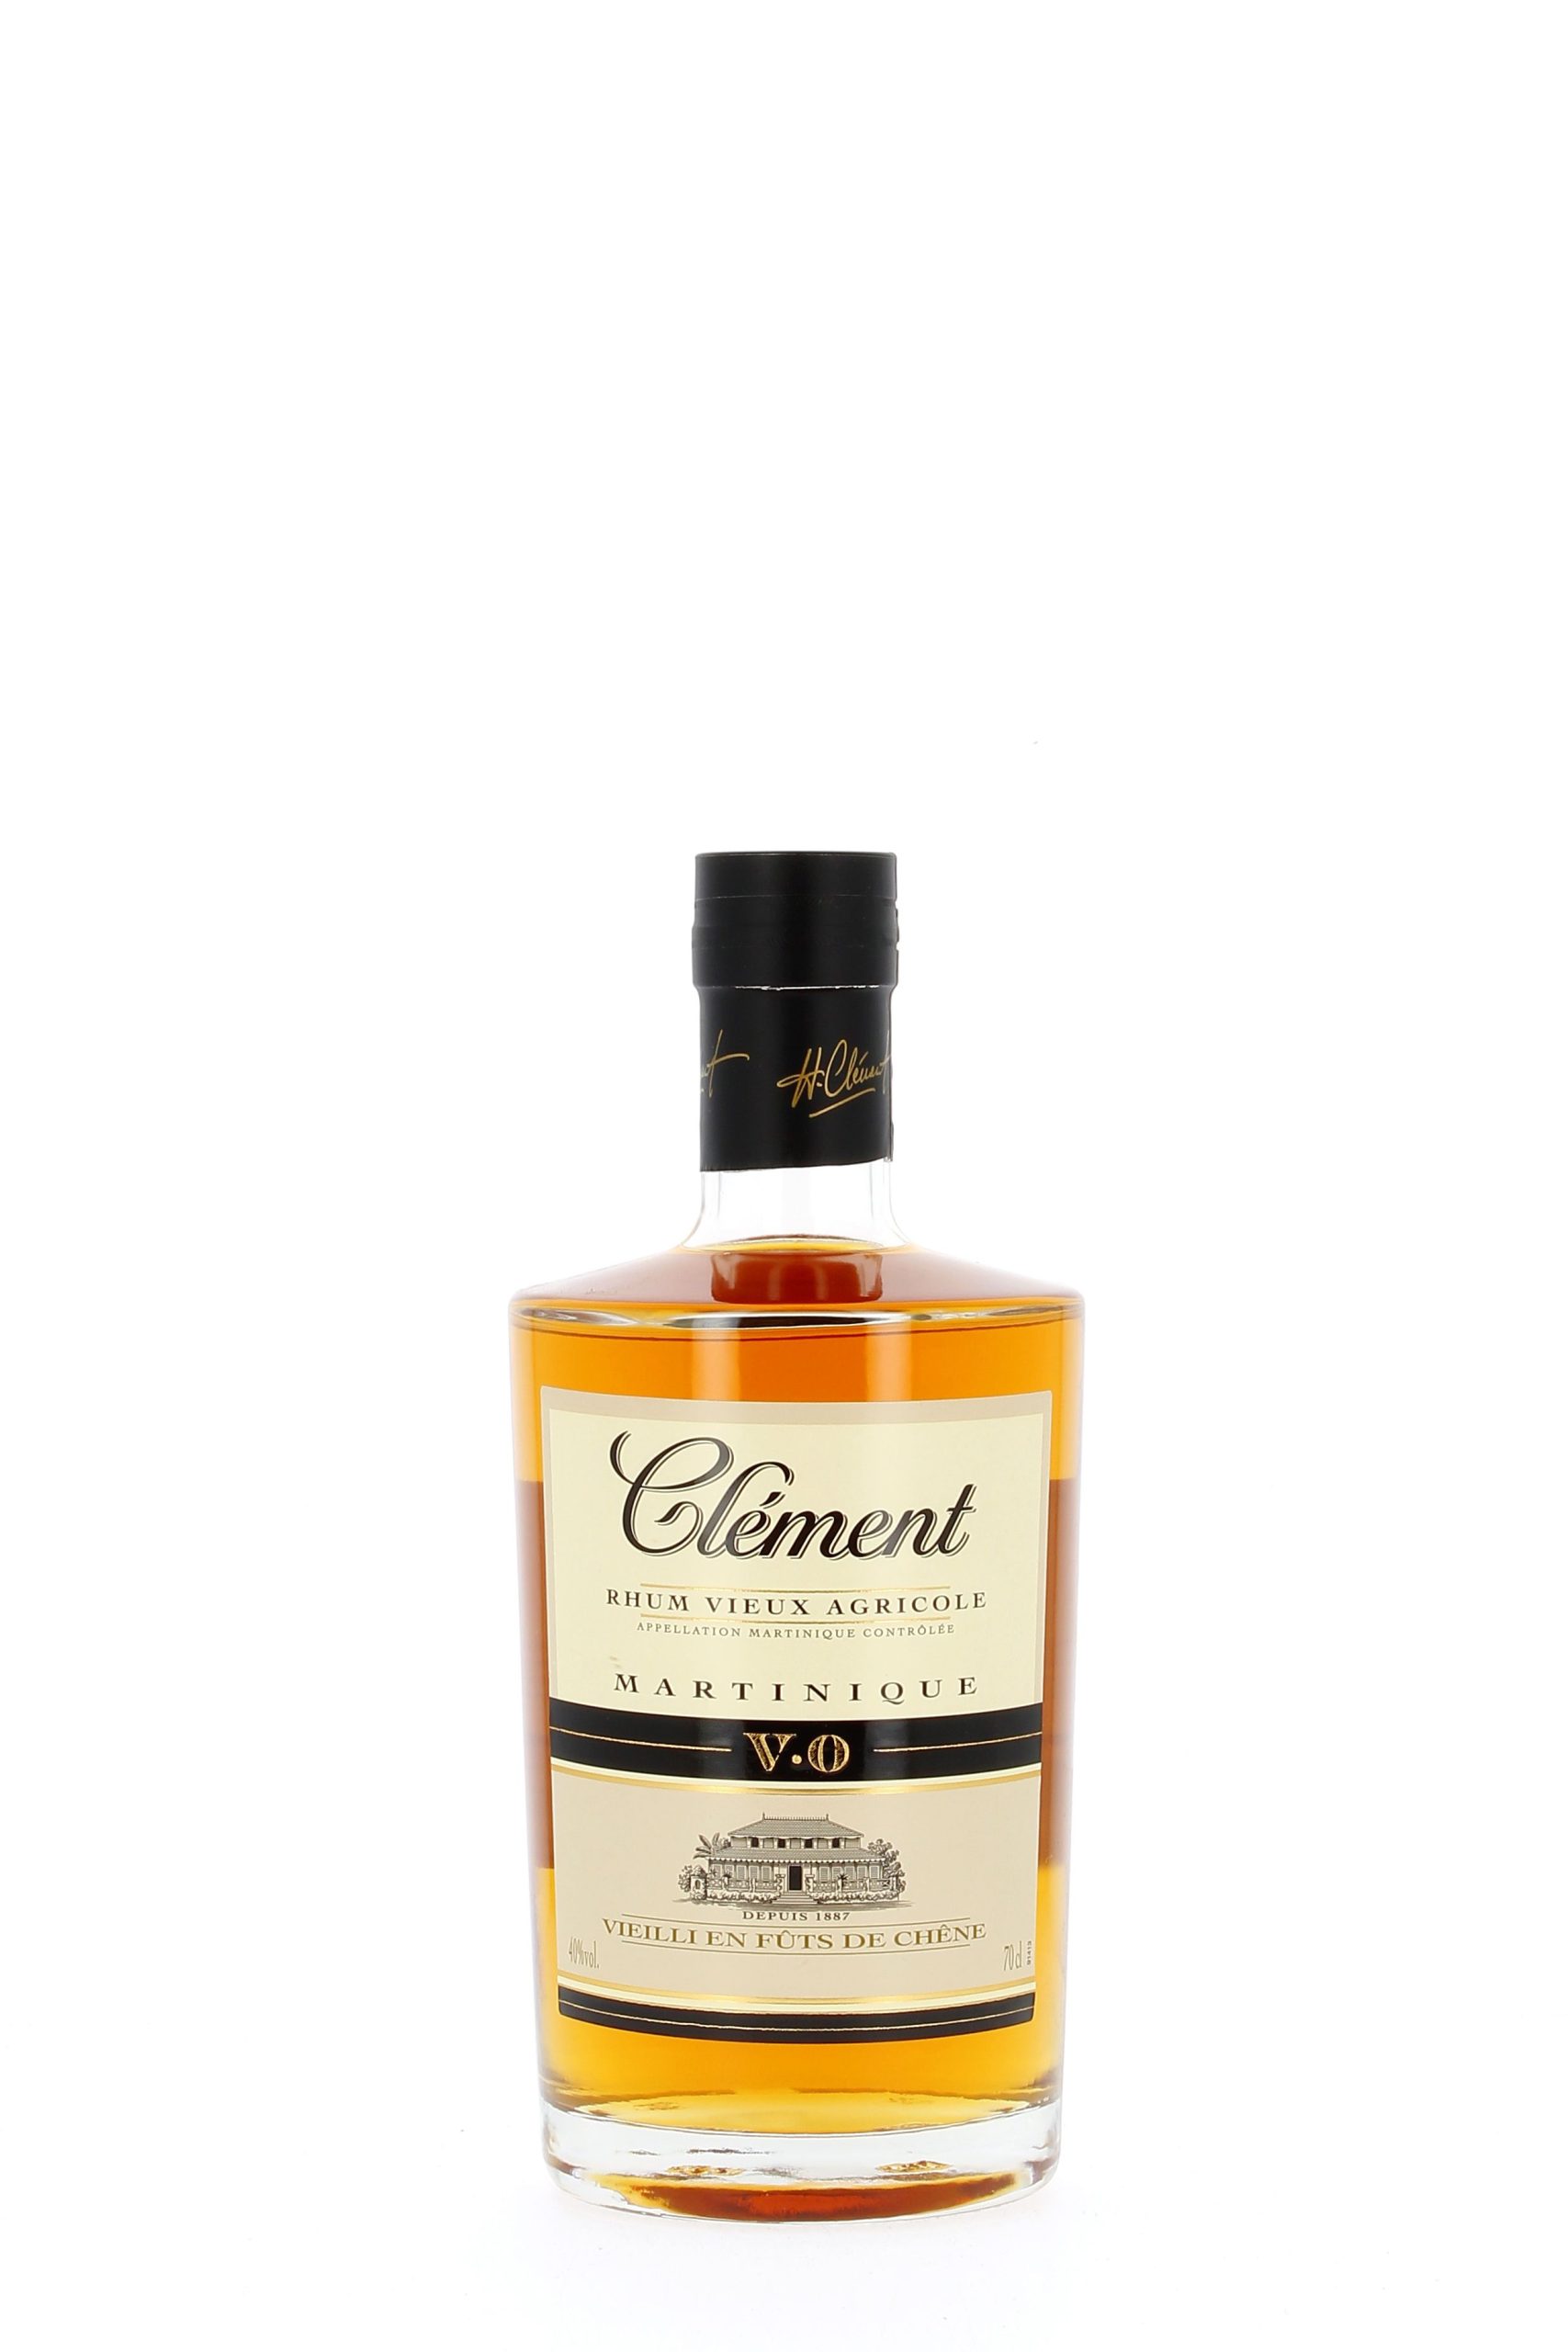 Clement Rhum Vieux X O 730ML - 120 West 58th Street Wine and